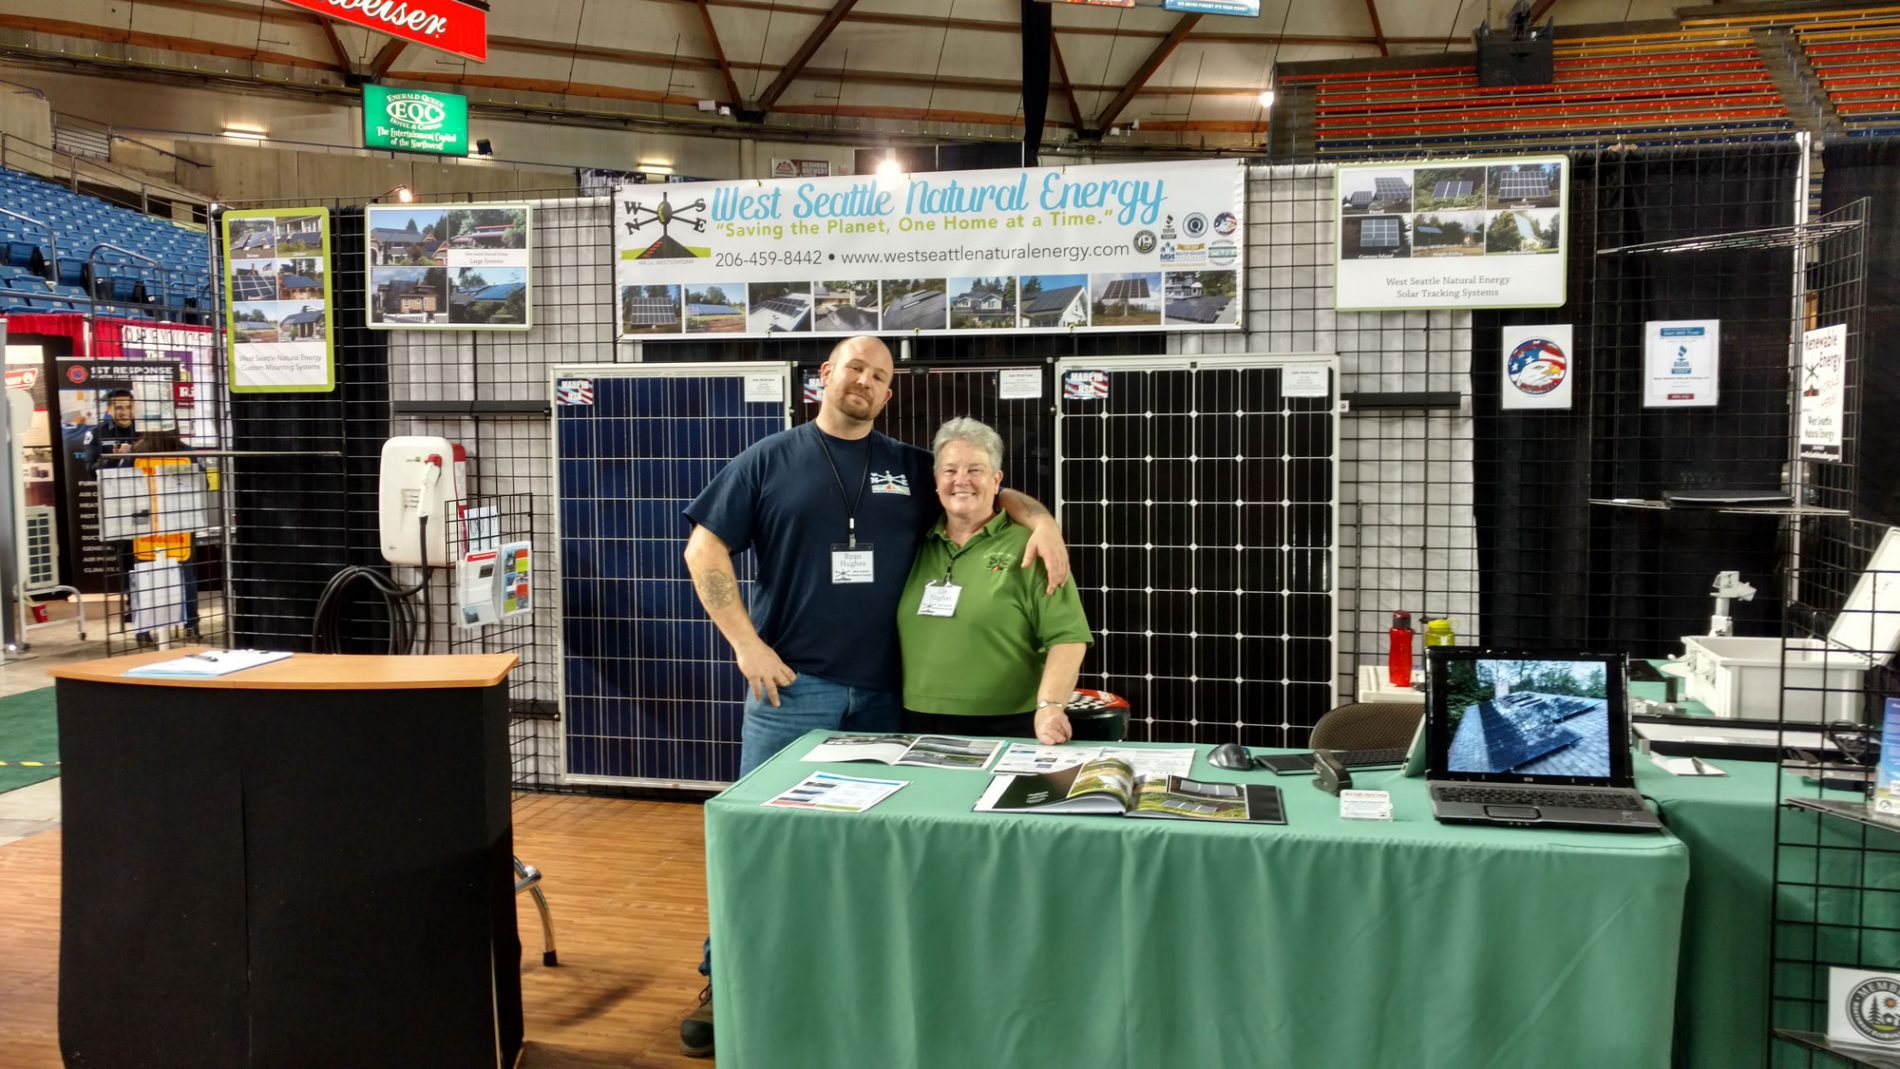 Tacoma Home Garden Show Jan 28 30 West Seattle Electric And